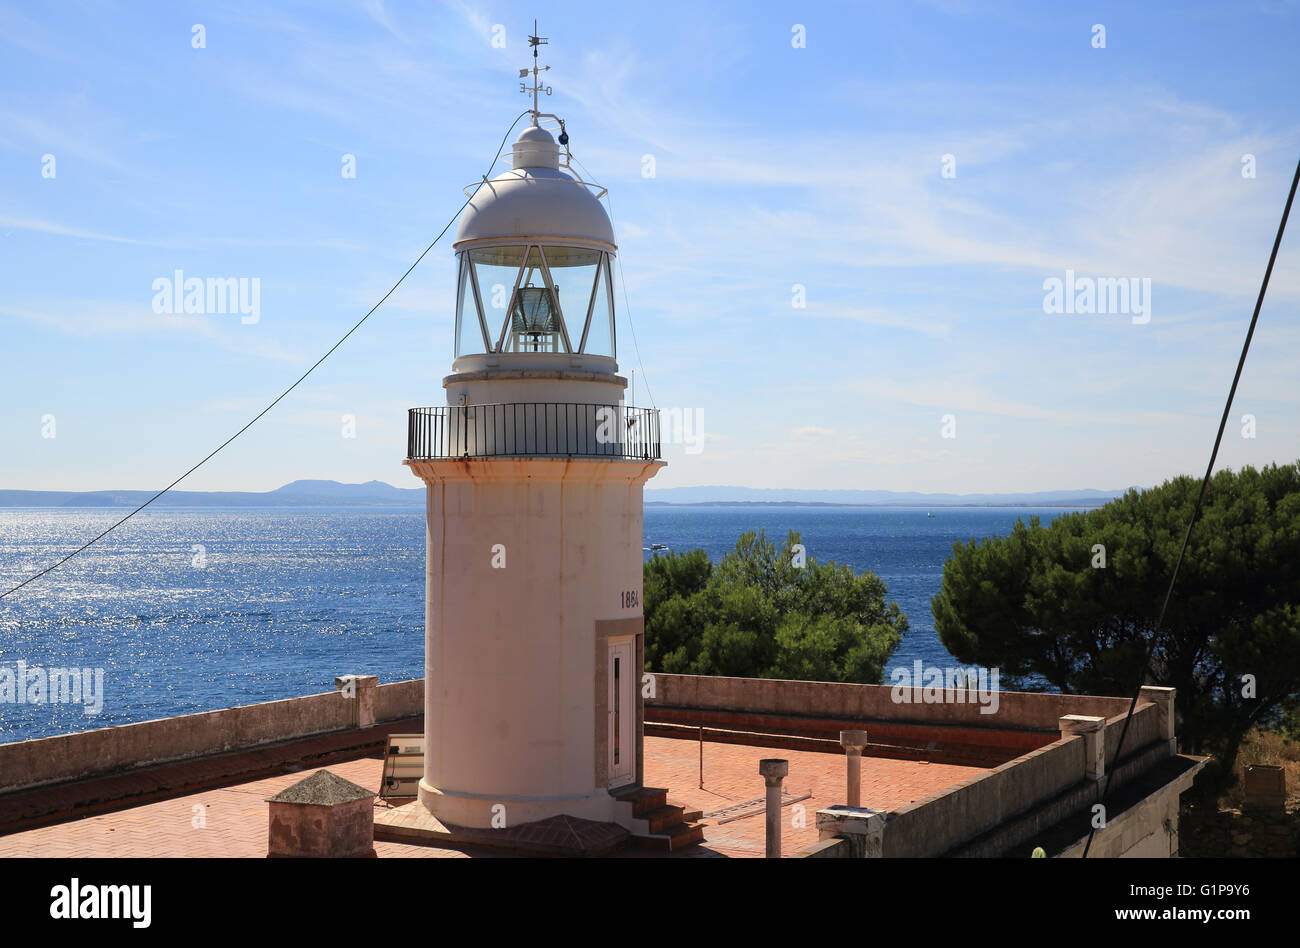 The lighthouse, overlooking the Mediterranean sea, in Roses, in the province of Girona, in Catalonia, on the Costa Brava, Spain Stock Photo